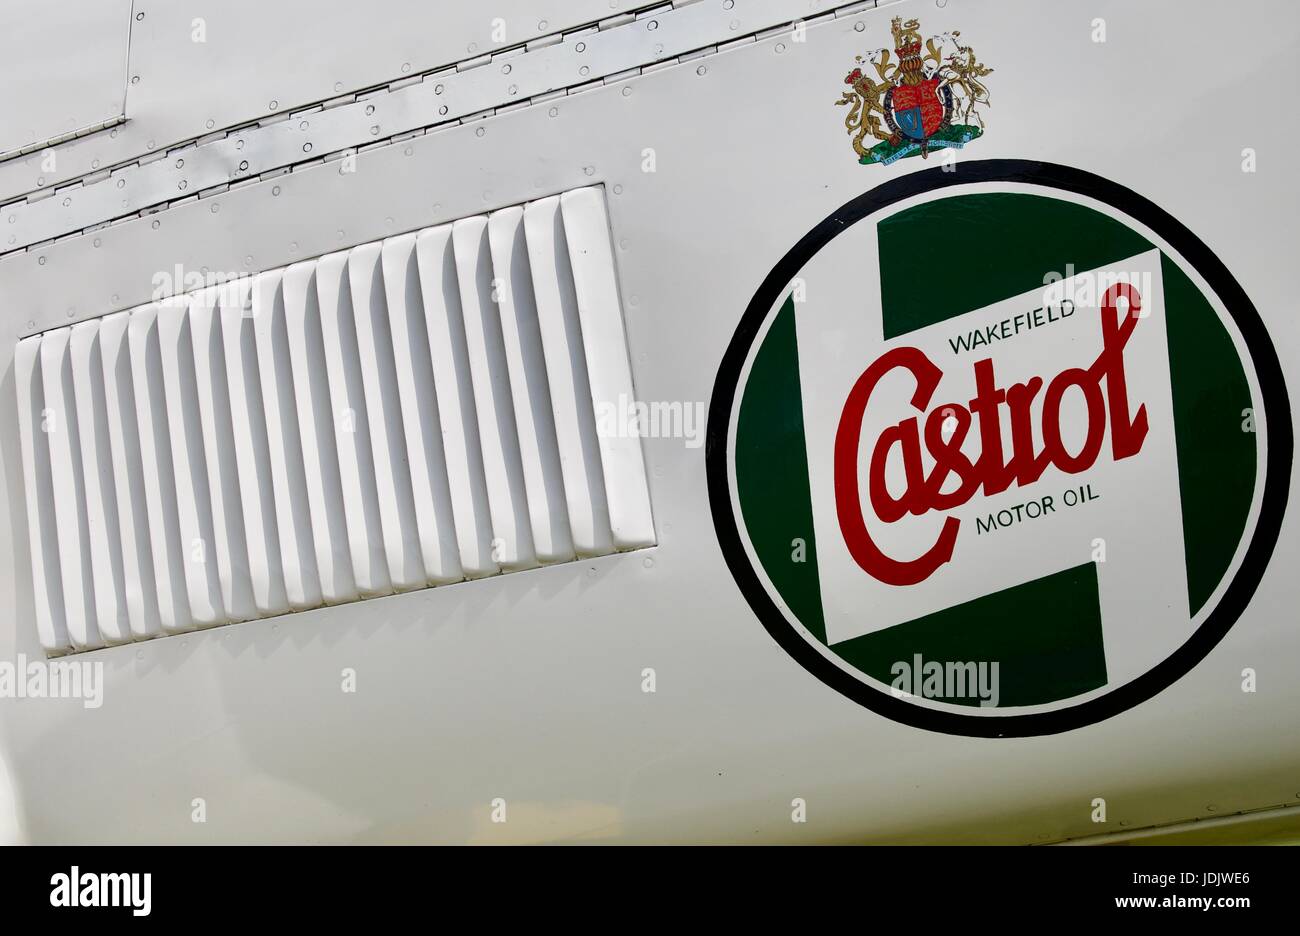 Castrol Motor Oil advertising on the engine cover of a1936 Percival Mew Gull aeroplane Stock Photo